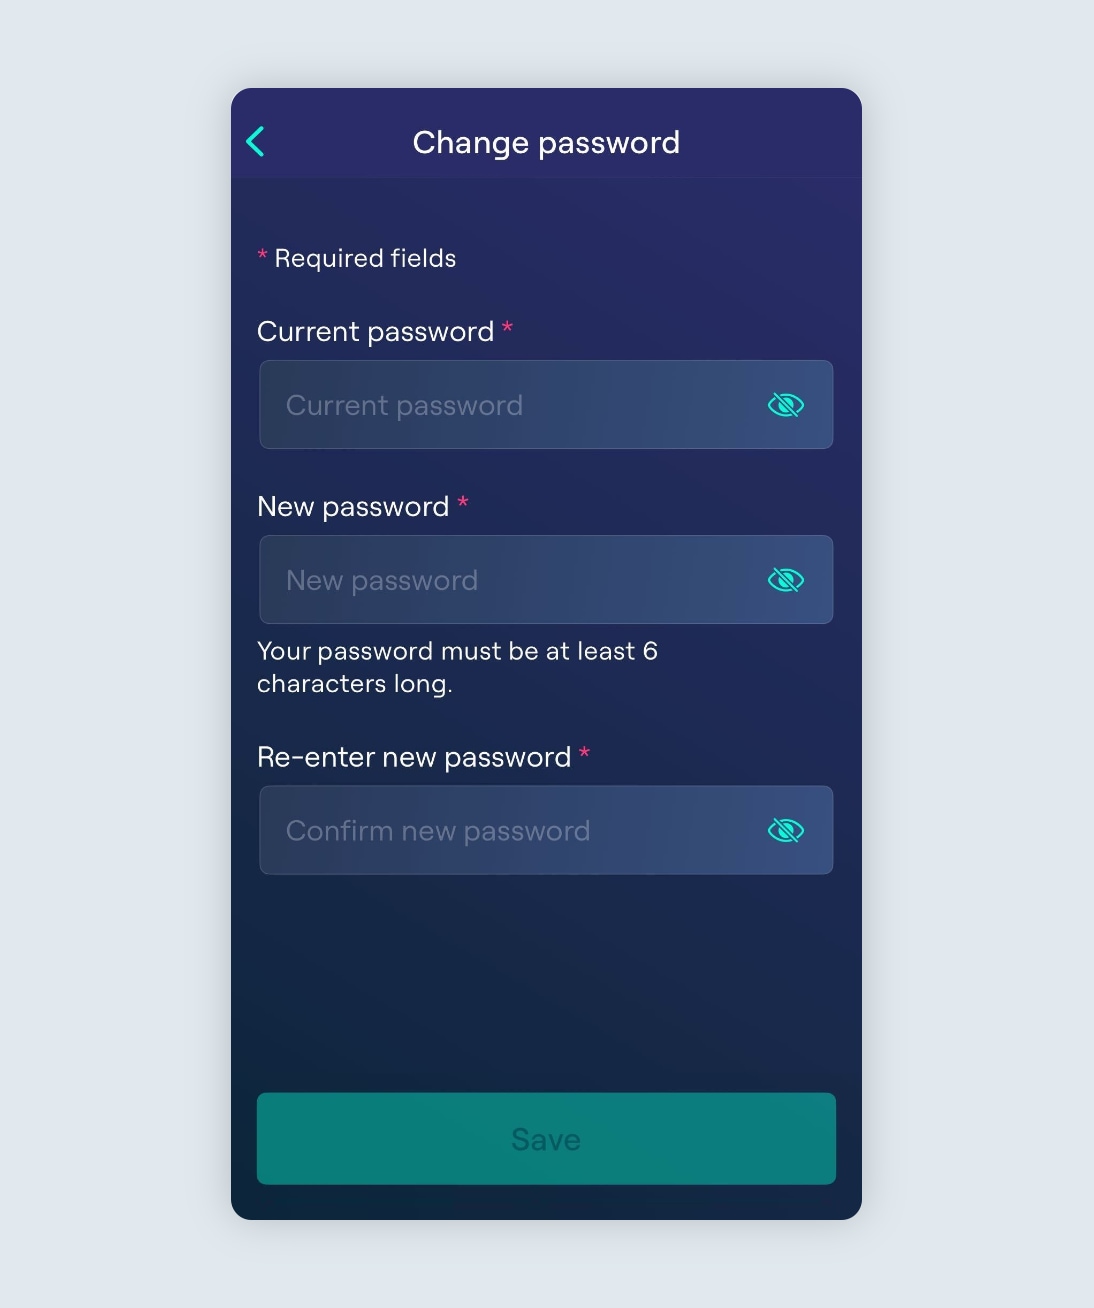 change password page in Ohme app